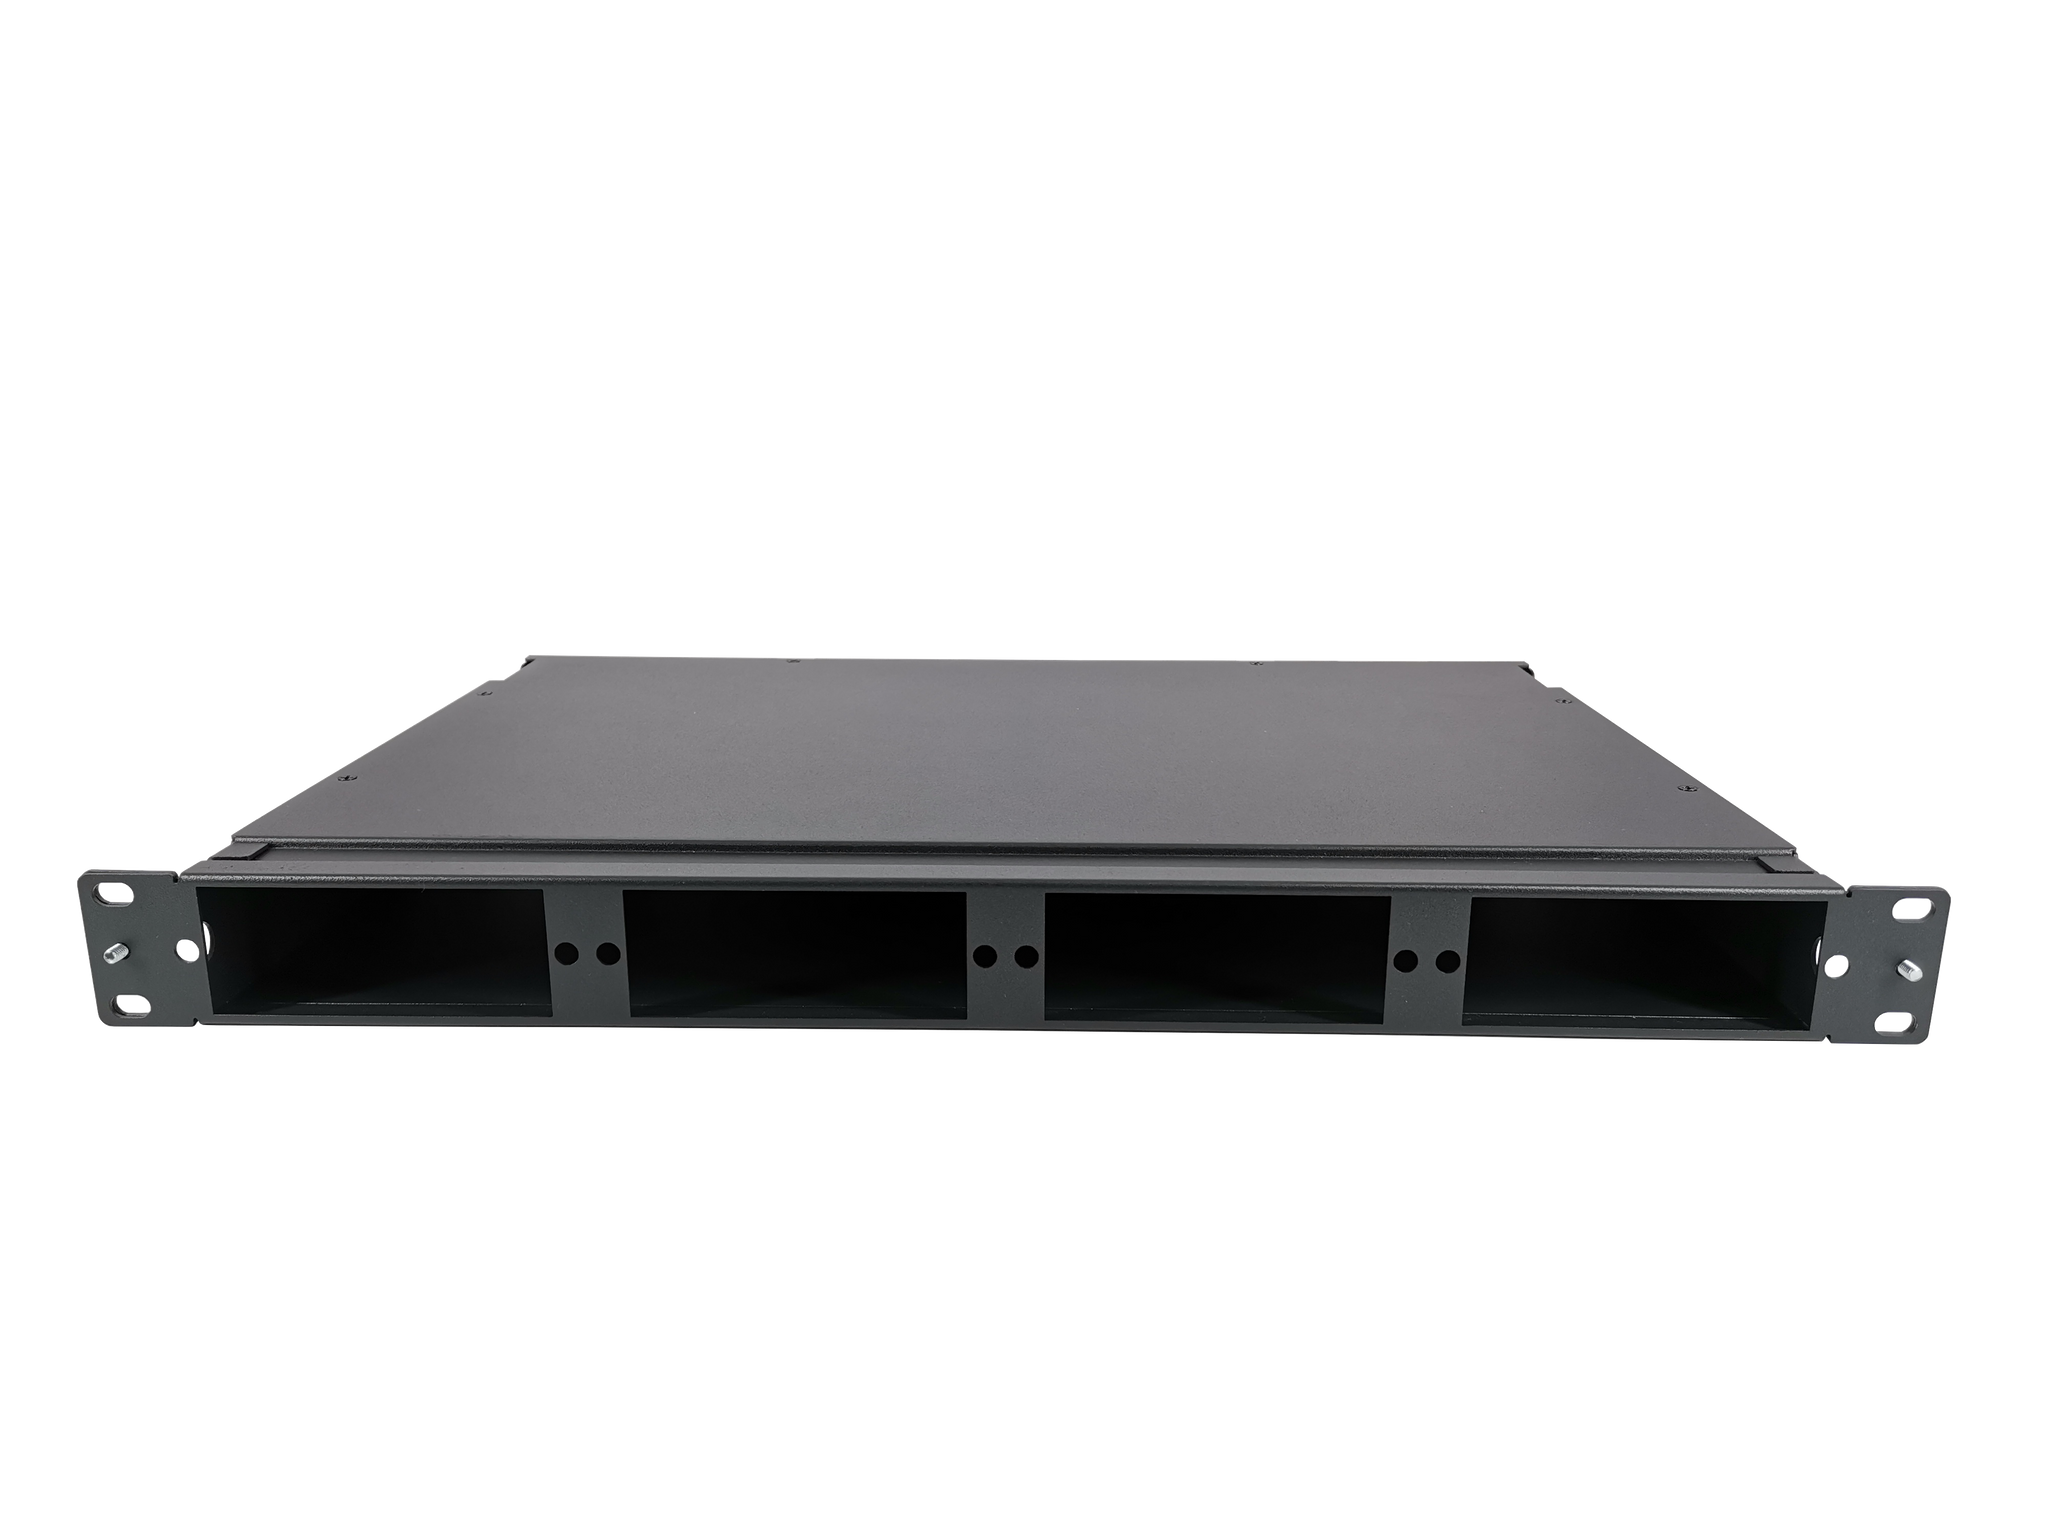 FHD High Density 1U Rack Mount Enclosure Unloaded, Holds up to 4x FHD Cassettes or Panels, up to 144 Fibers, FHD-1UFMT-N